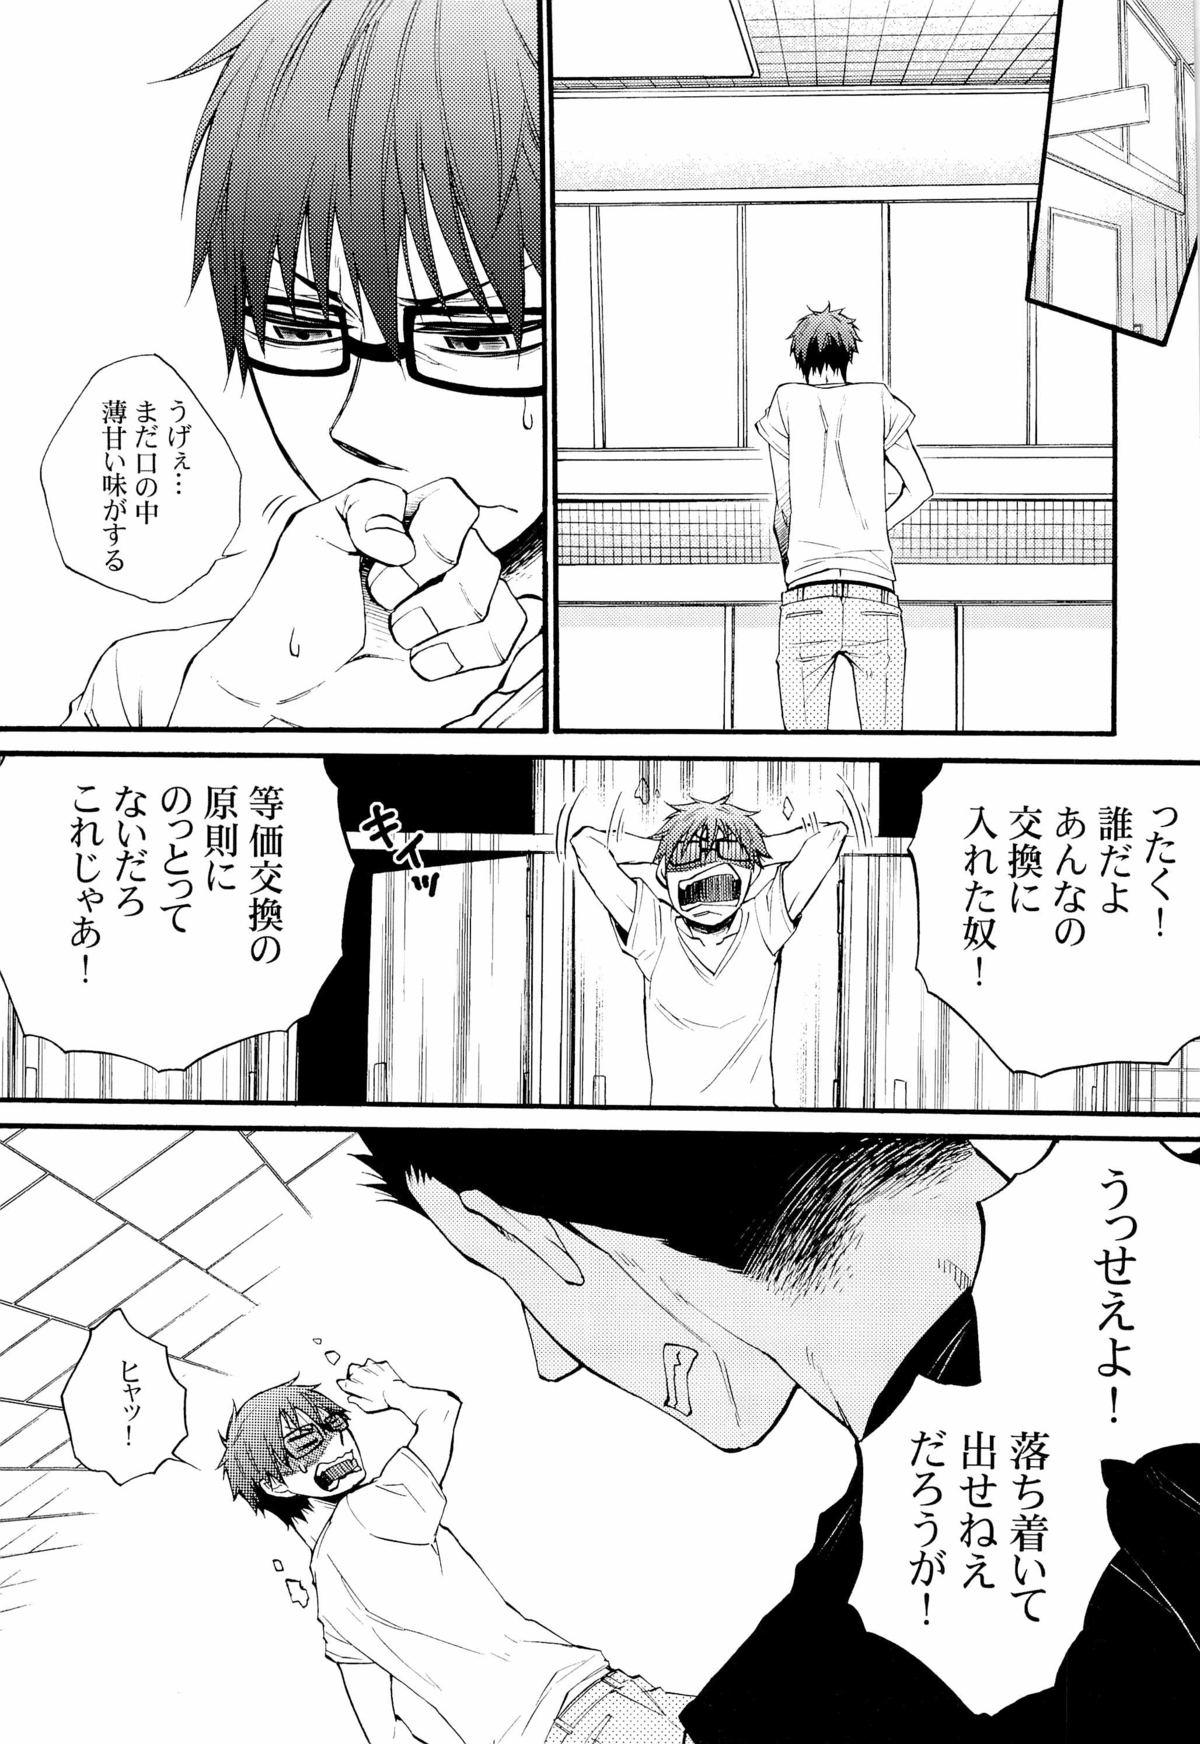 Fucks AFTER TASTE - Silver spoon Slapping - Page 7